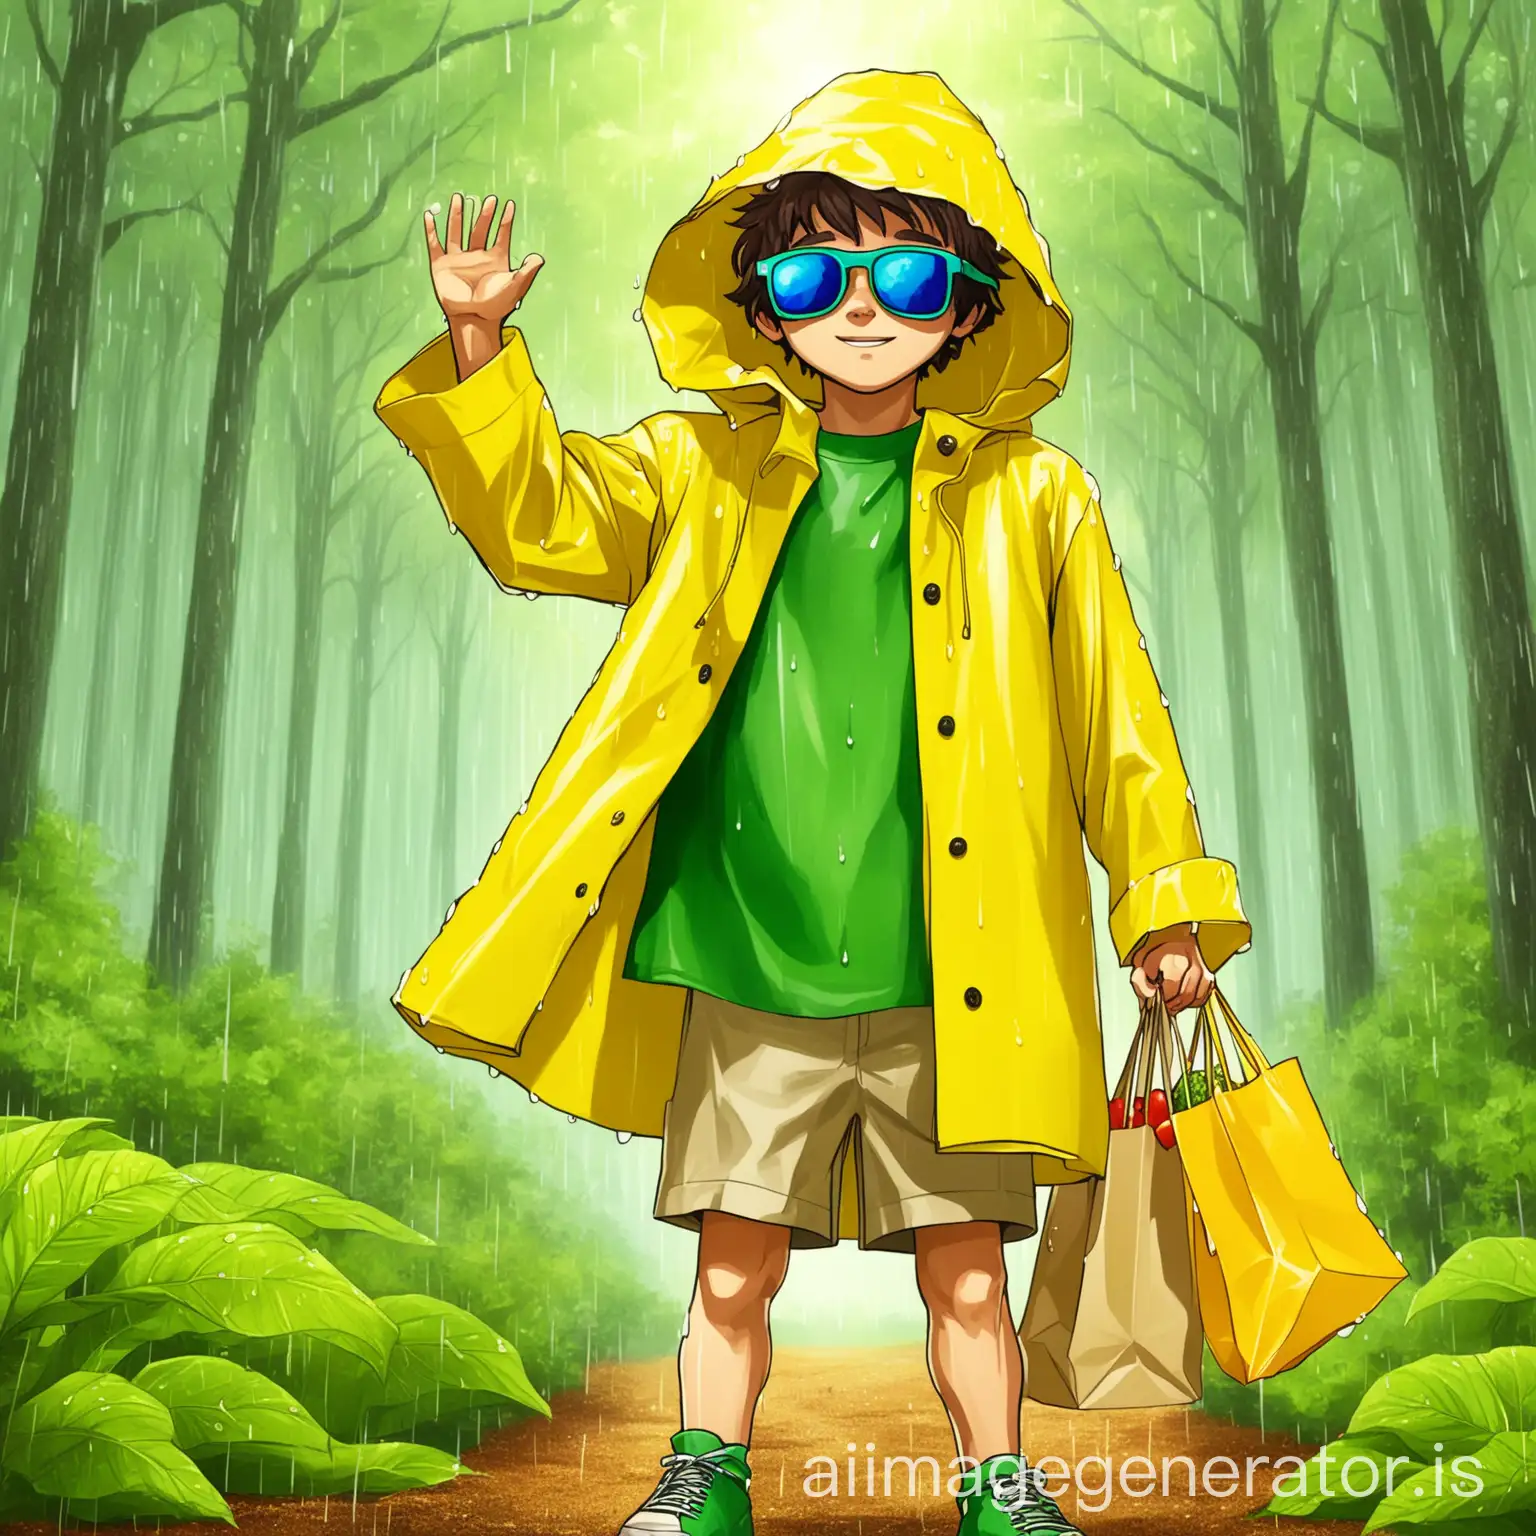 Image of Eco-hero boy in front of clean forest glade in salty costume and yellow raincoat with eco-shopper and eco-sunglasses